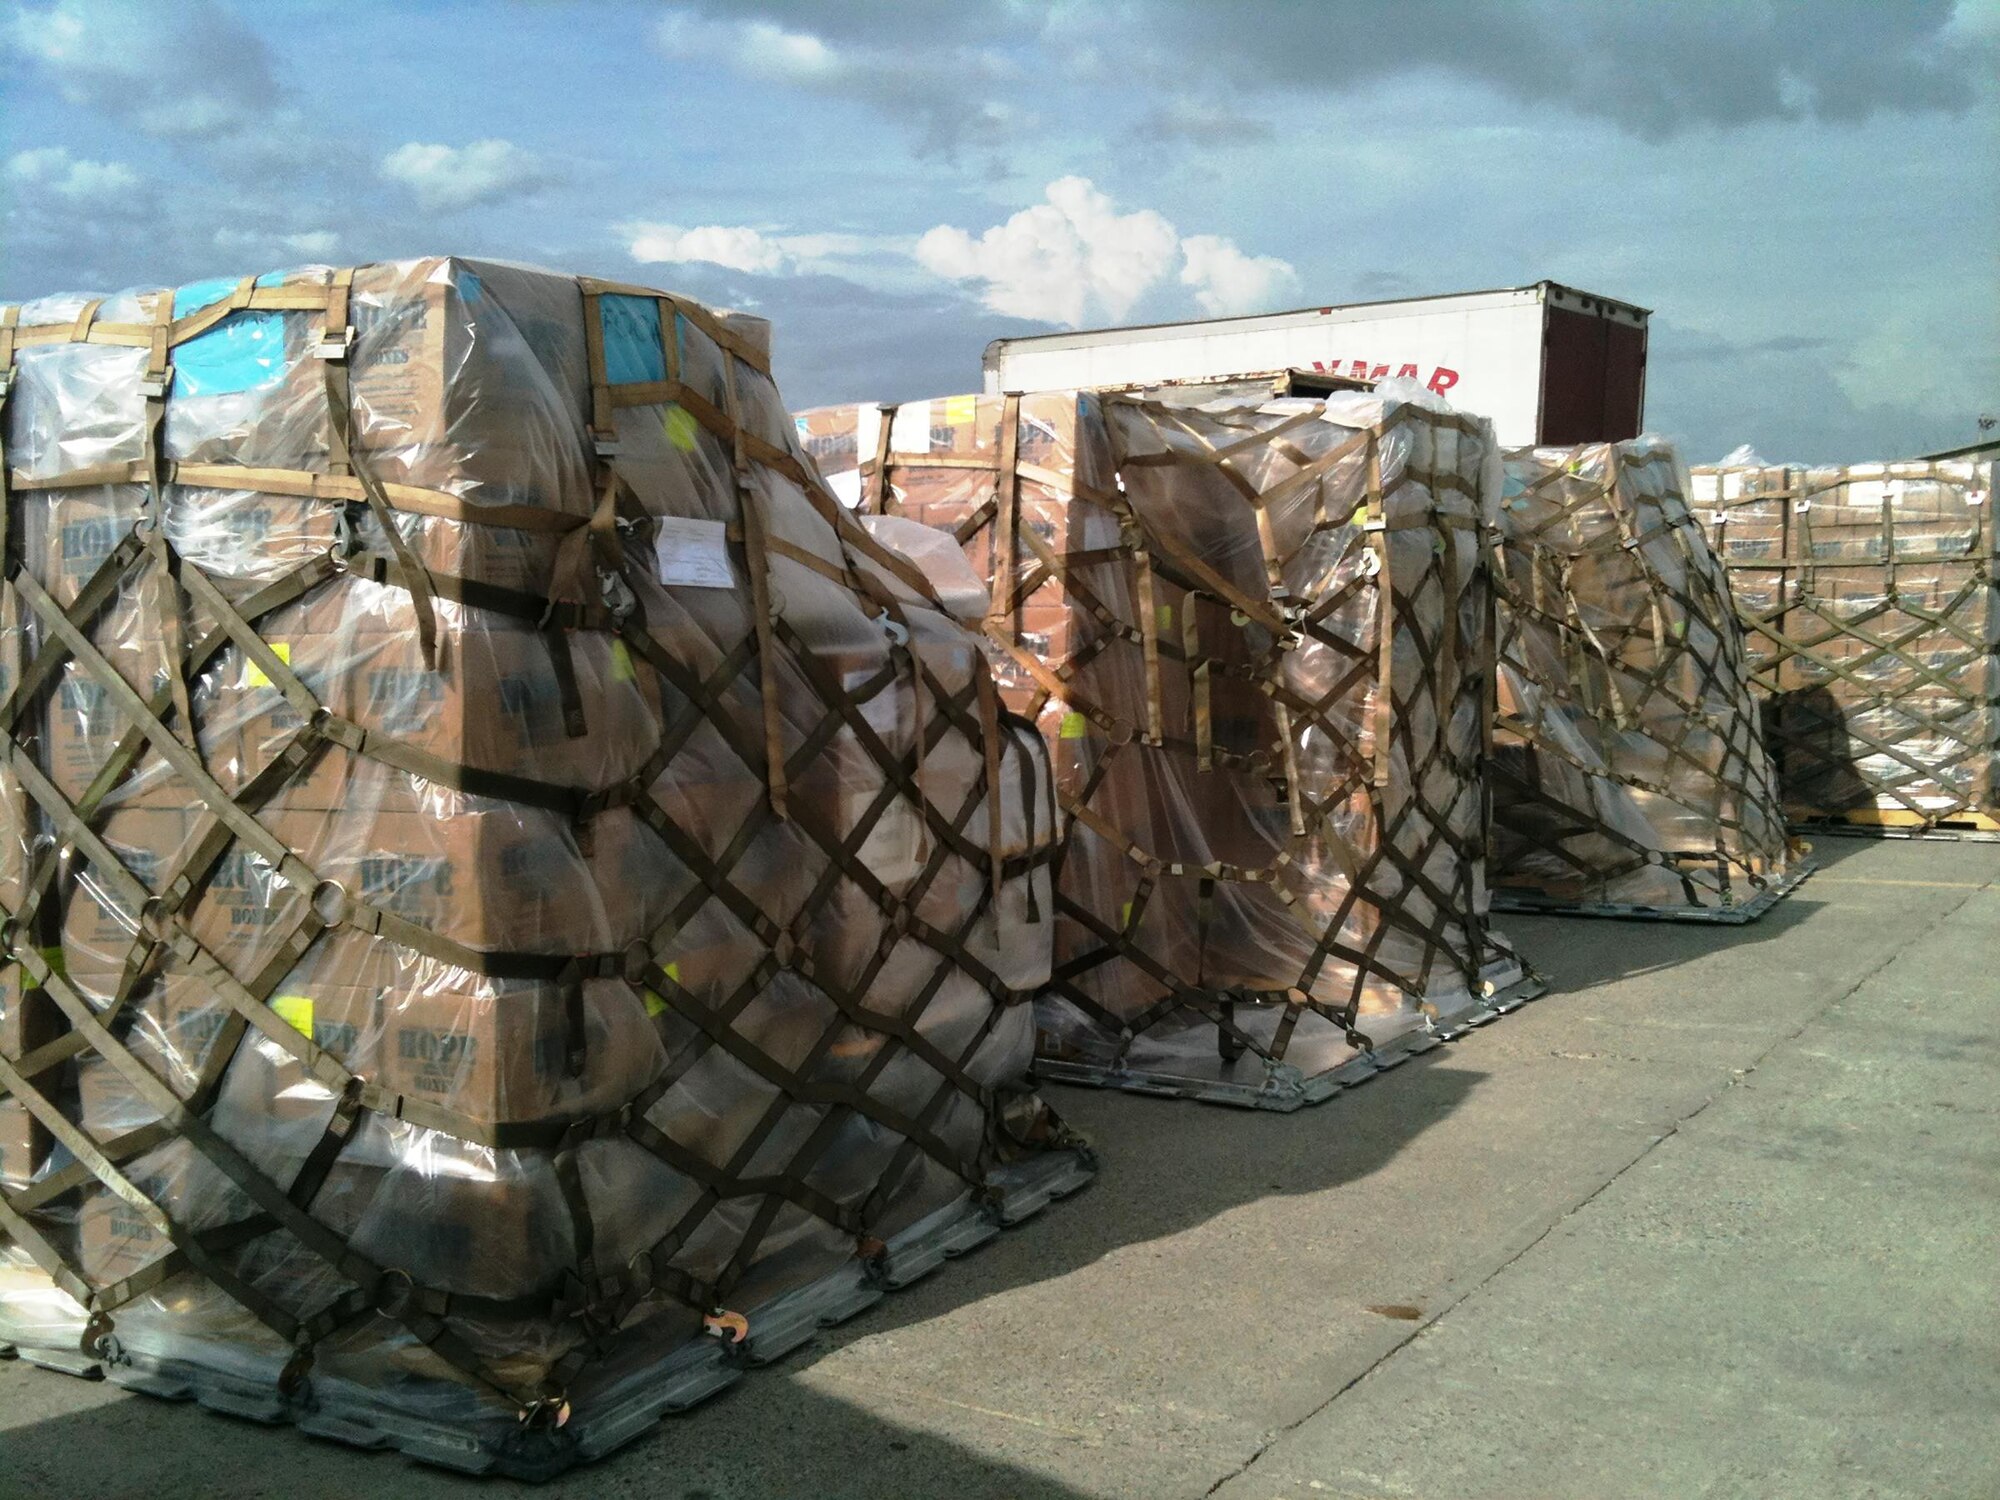 Fifteen pallets of rice and beans, equating to 615,000 meals, sit on the tarmac in Port-Au-Prince after being unloaded from a 445th Airlift Wing C-17 Globemaster III May 26, 2016. The food items, provided by Kids Against Hunger, a ministry of A Child's Hope International from Cincinnati, Ohio, were delivered to the impoverished country through the Denton Program.